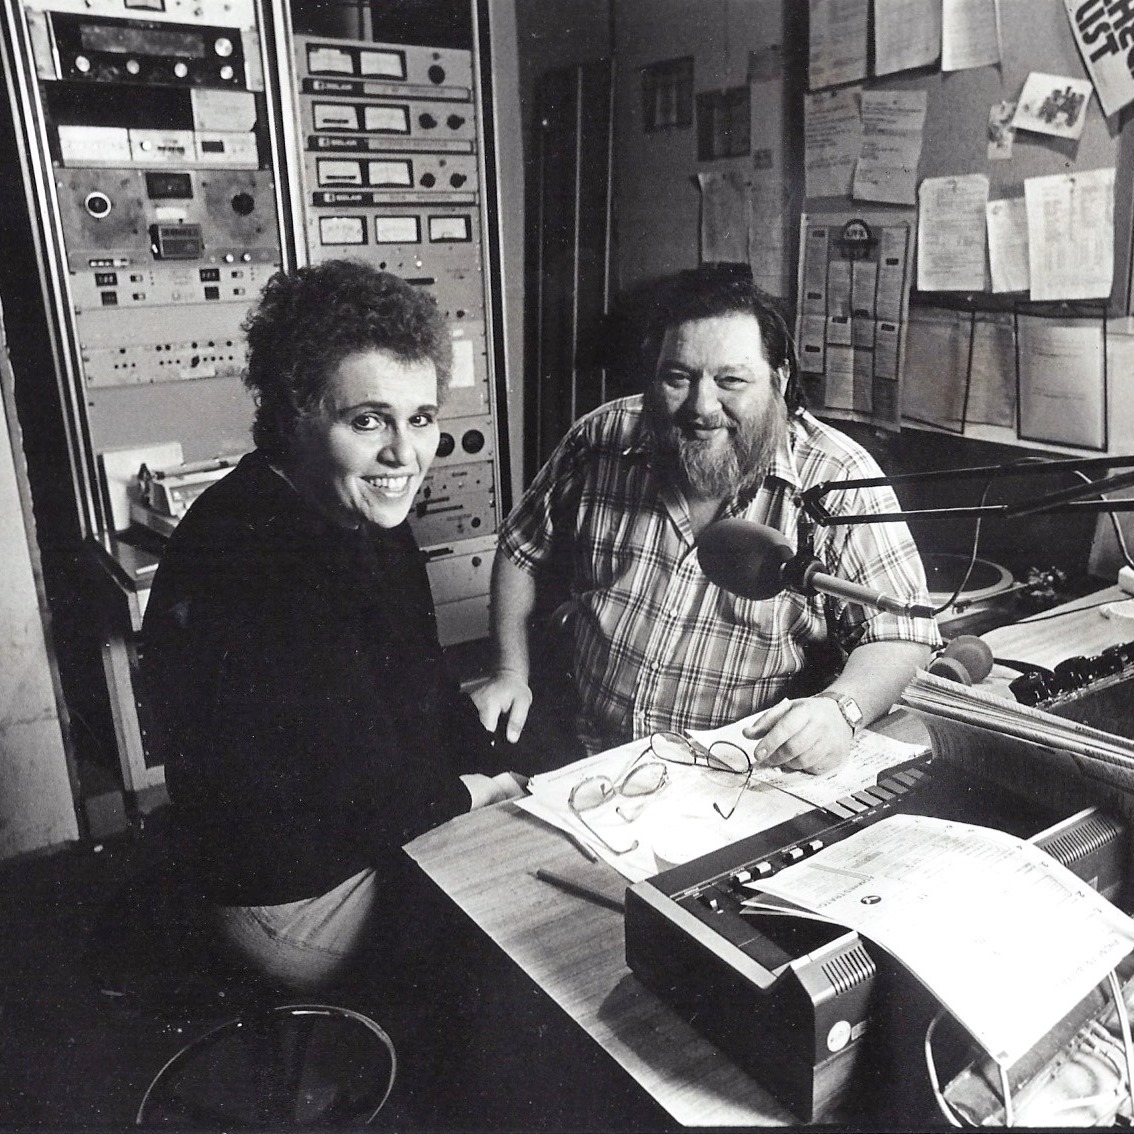 The late founders of the FolkScene radio program on KPFK Pacifica Radio, Howard & Roz Larman, 1980.  Thanks to Howard and Roz I got to meet Joan Baez, Merle Travis, John Hartford and countless other amazing and legendary performers.  Show is still on the air, with Jr. in charge!